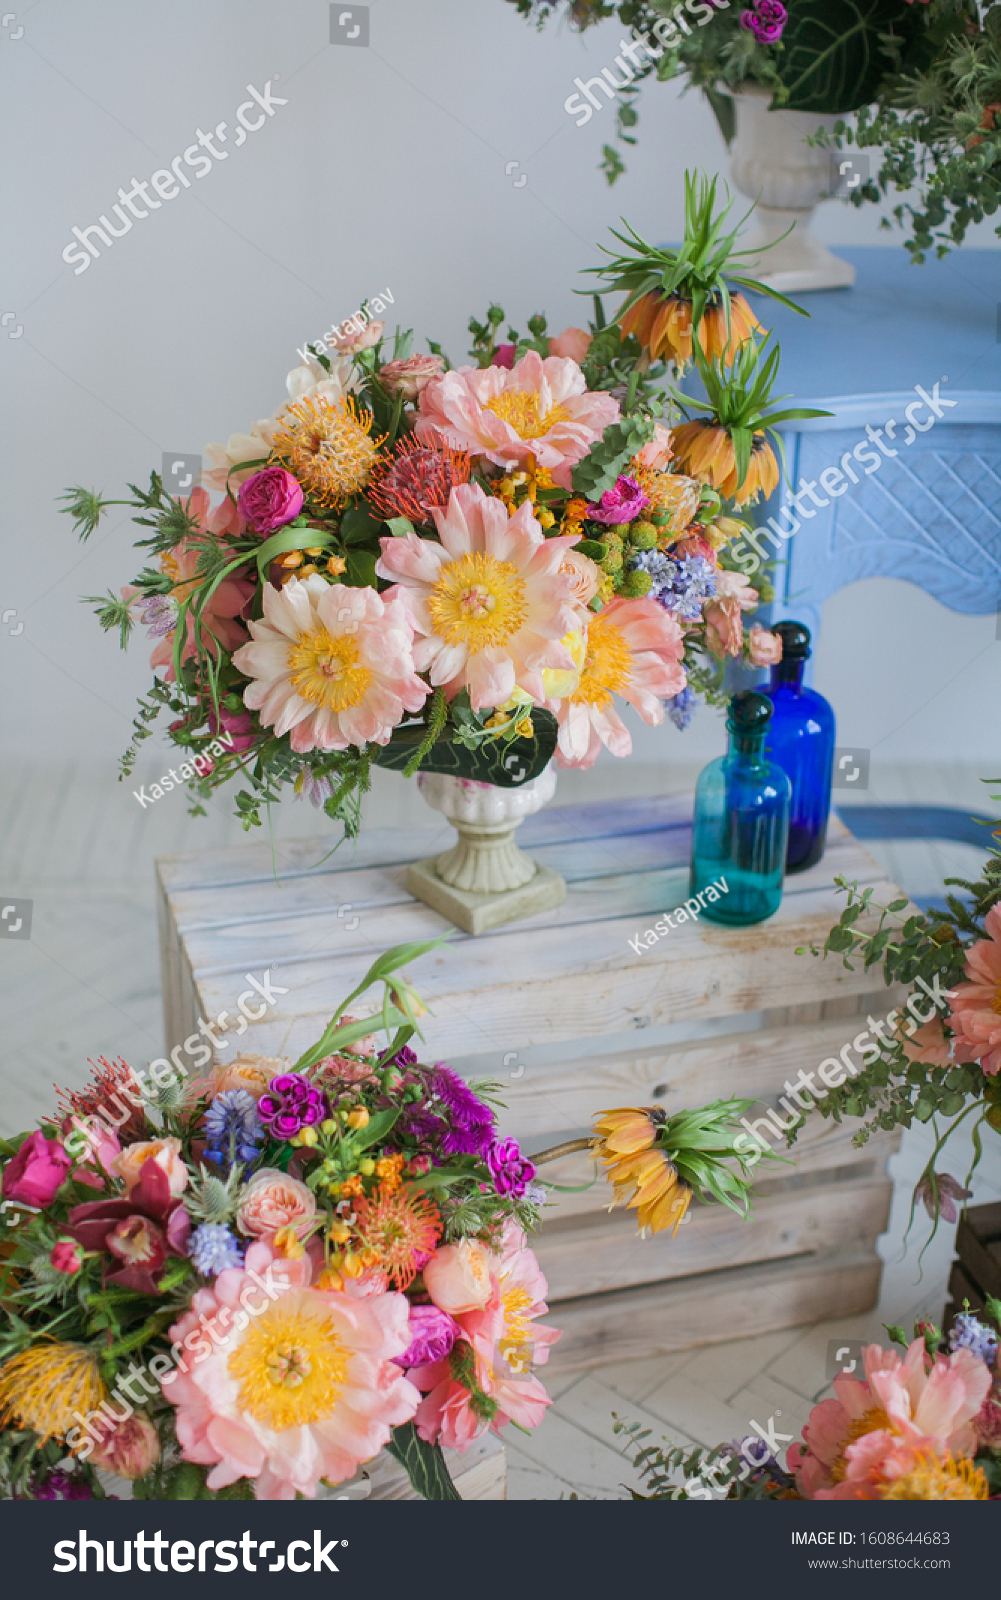 Workshop on creating a bouquet and floral arrangements from different plants in the style of boho chic. Pink peonies, red roses, green eucalyptus. Bouquets in ceramic wooden coasters. For weddings. #1608644683